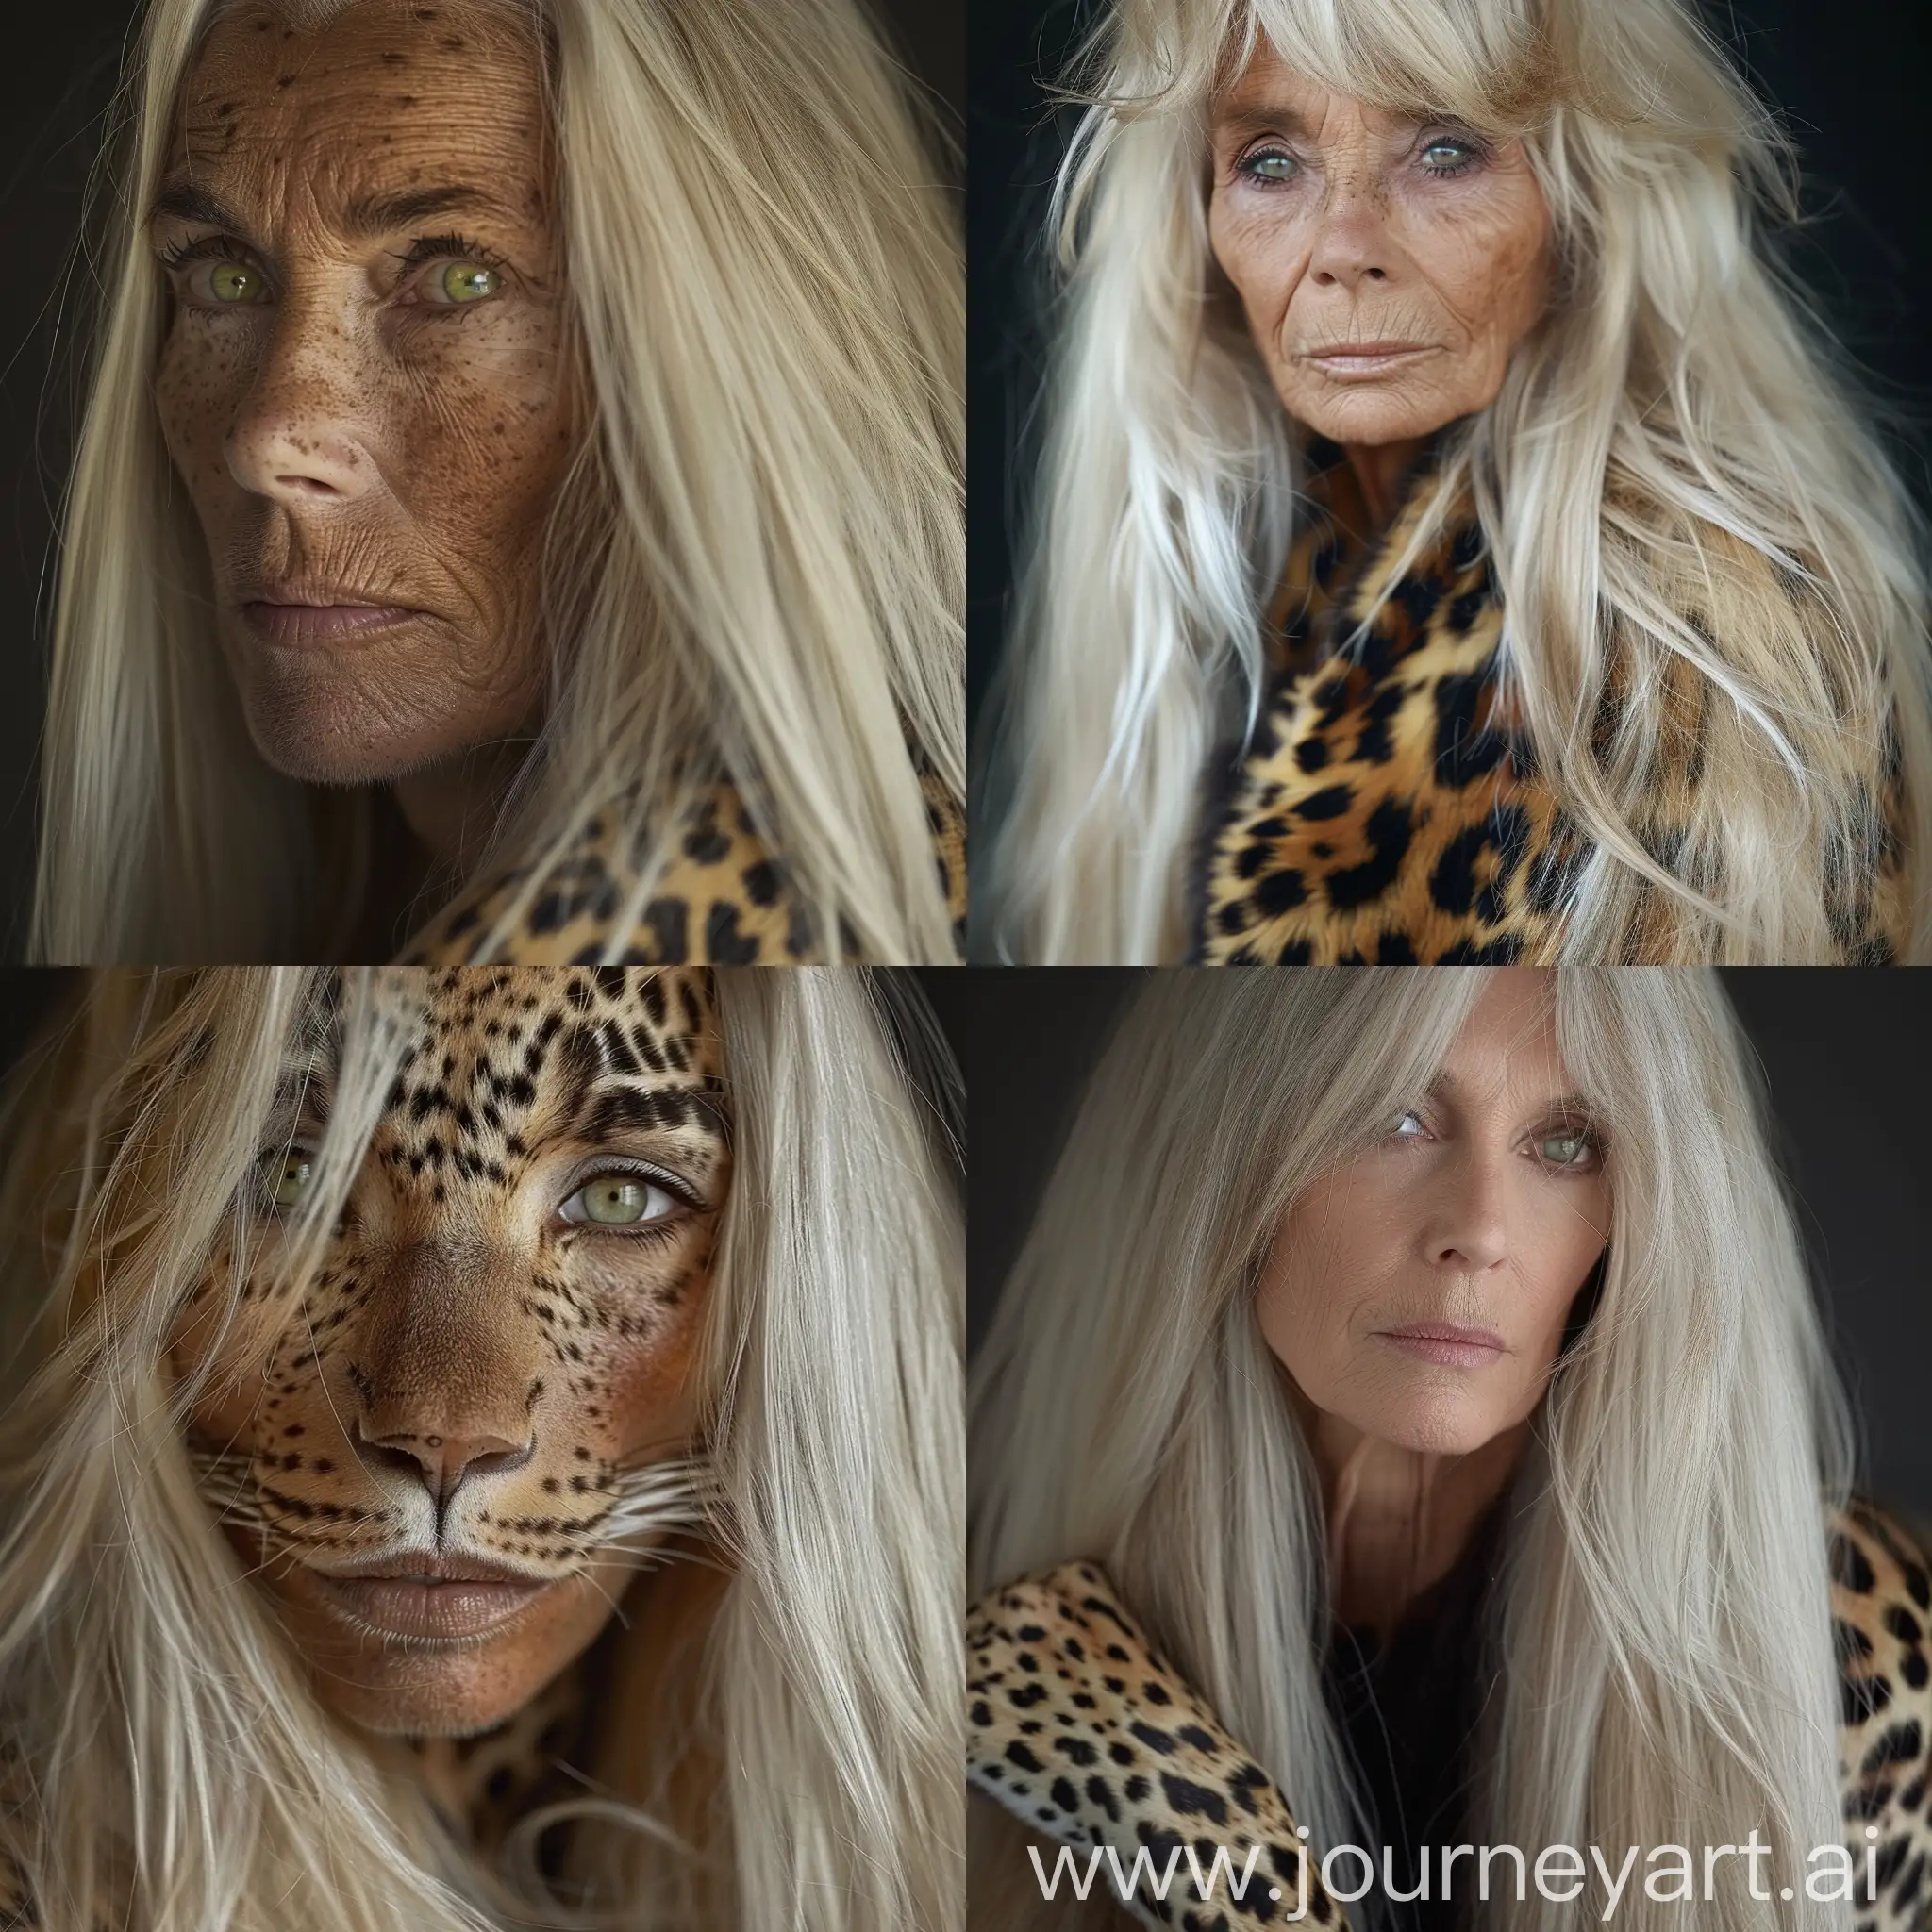 Wild-Woman-with-Long-Blonde-Hair-and-Green-Eyes-in-Leopard-Skin